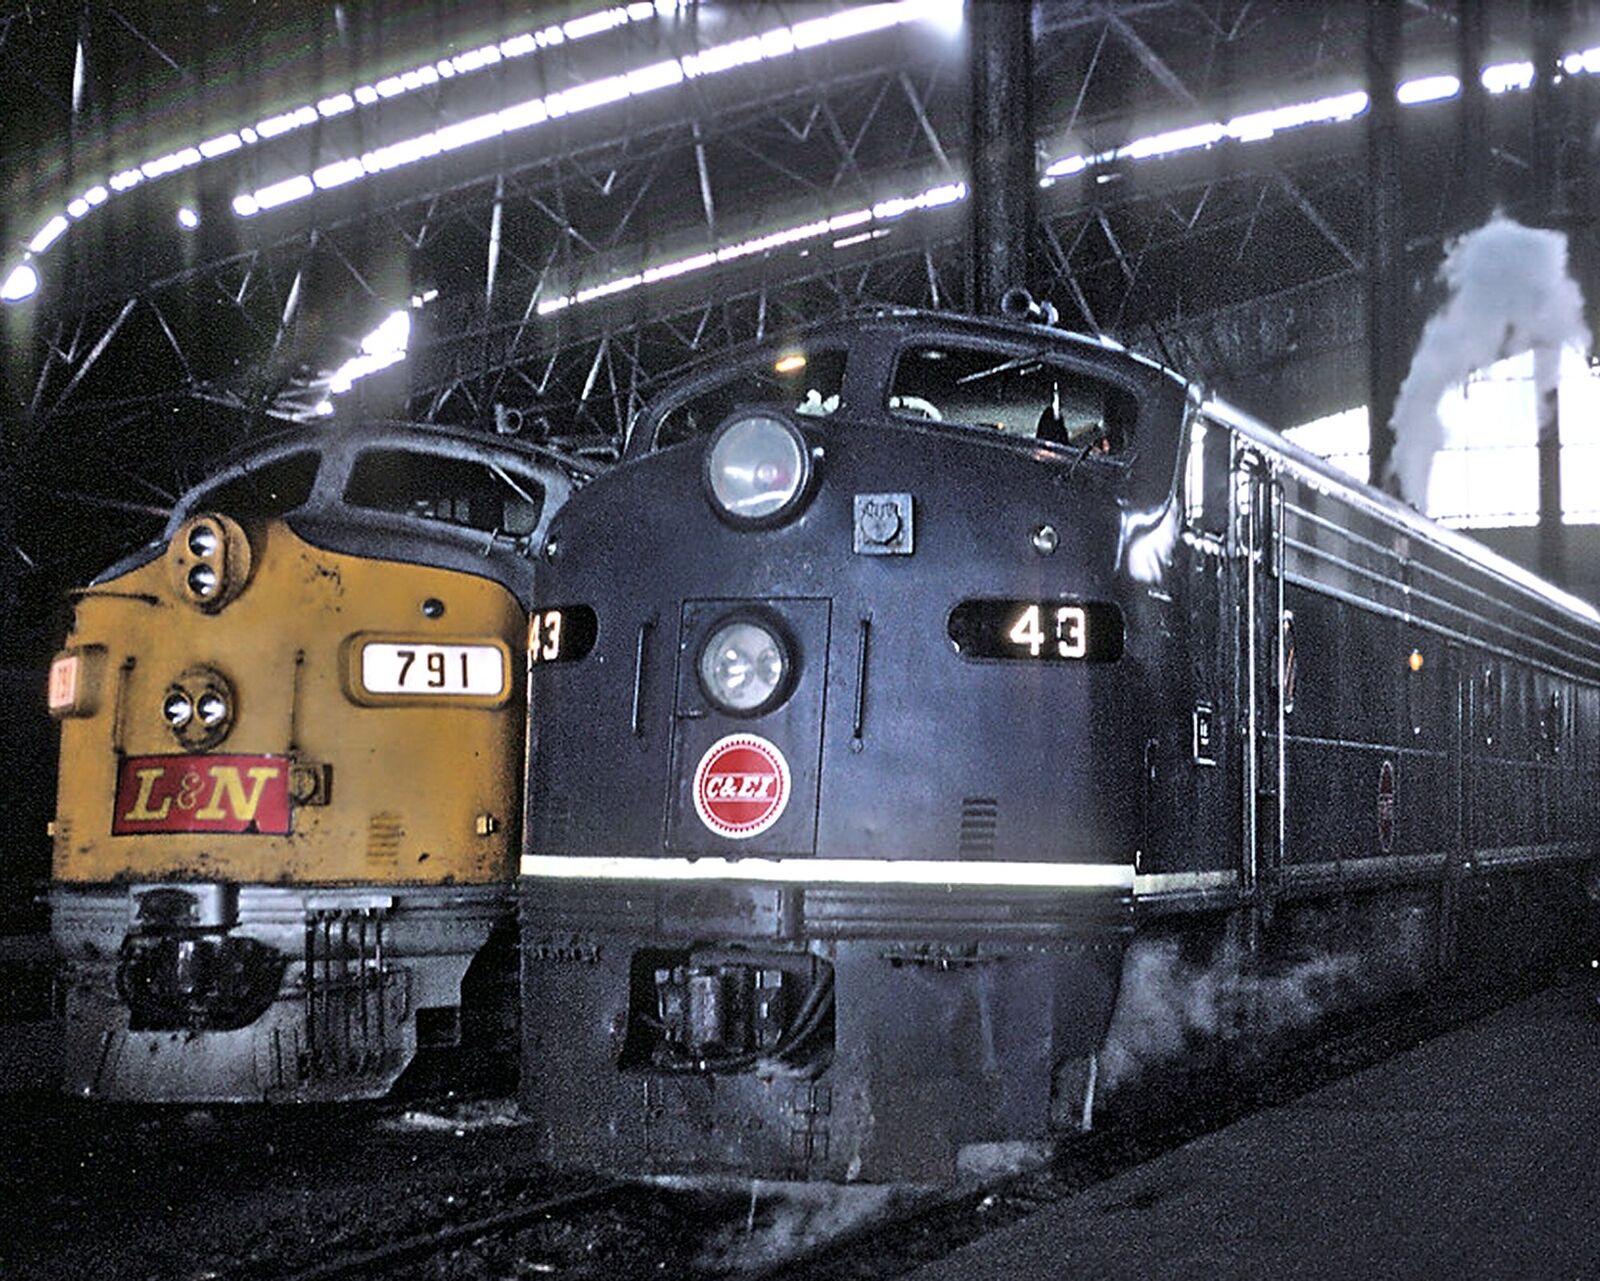 1980s LOCOMOTIVES in St Louis Train Shed 8.5X11 PHOTO